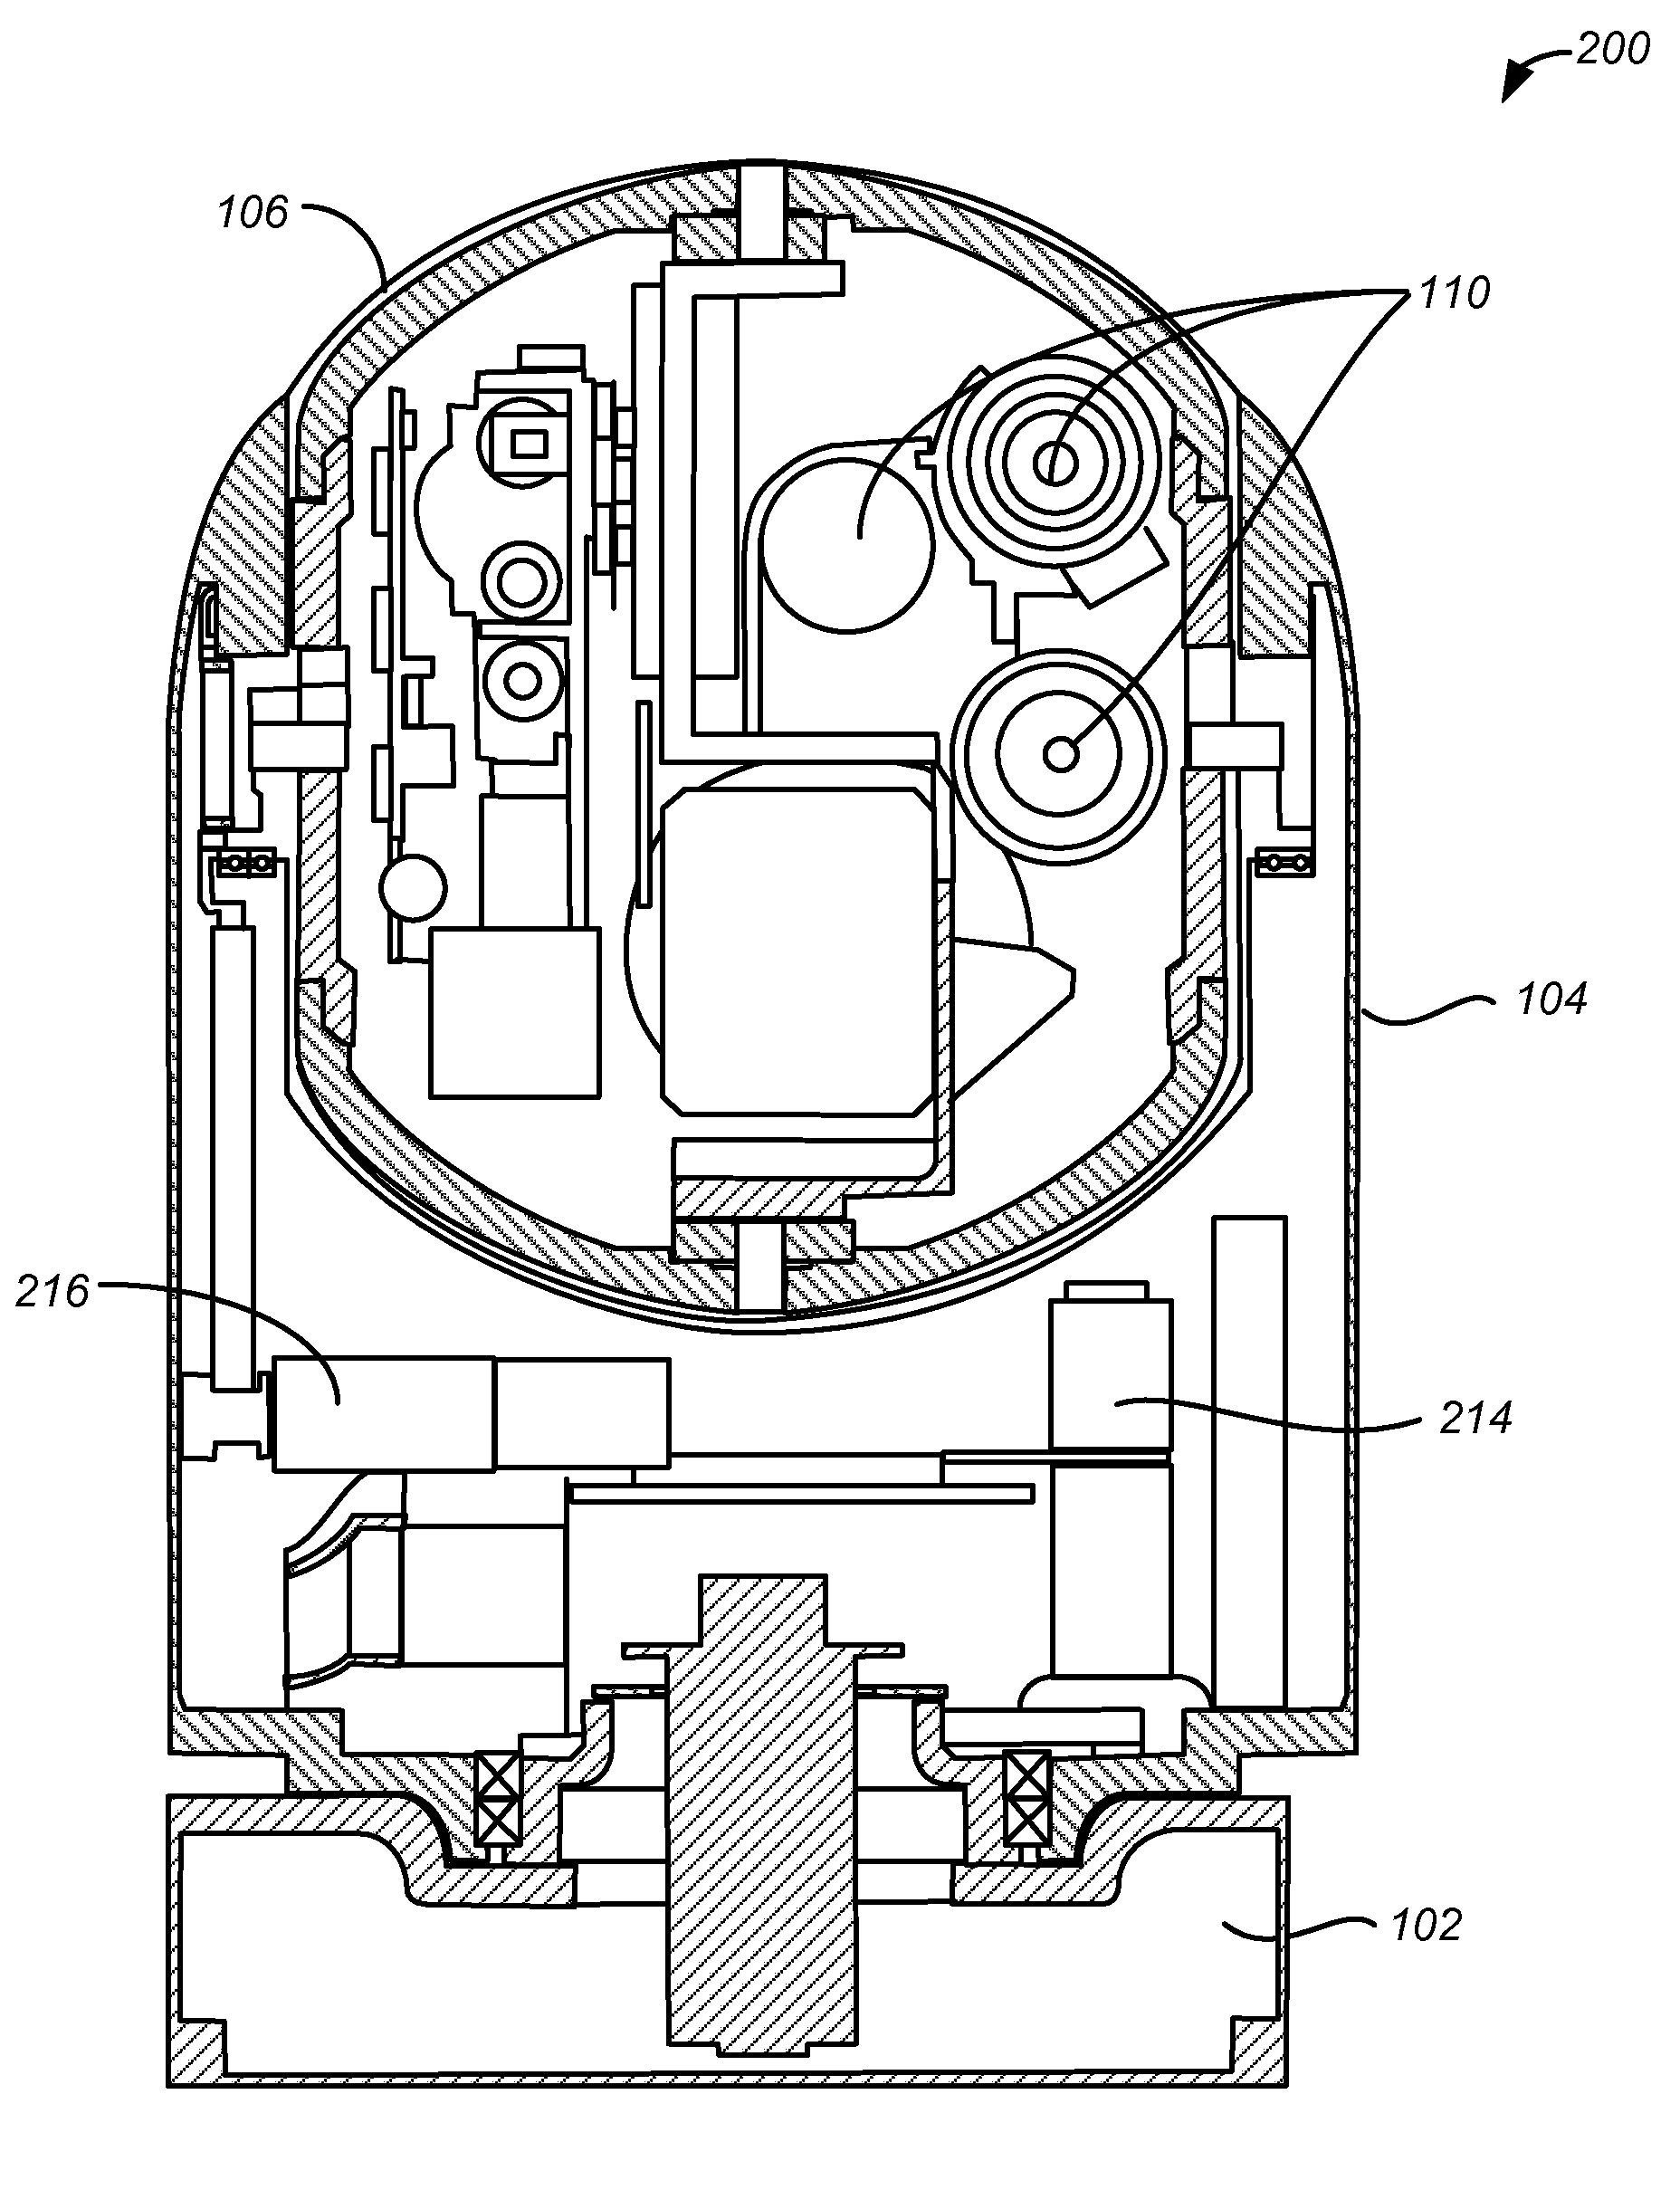 Multi-axis sector motor